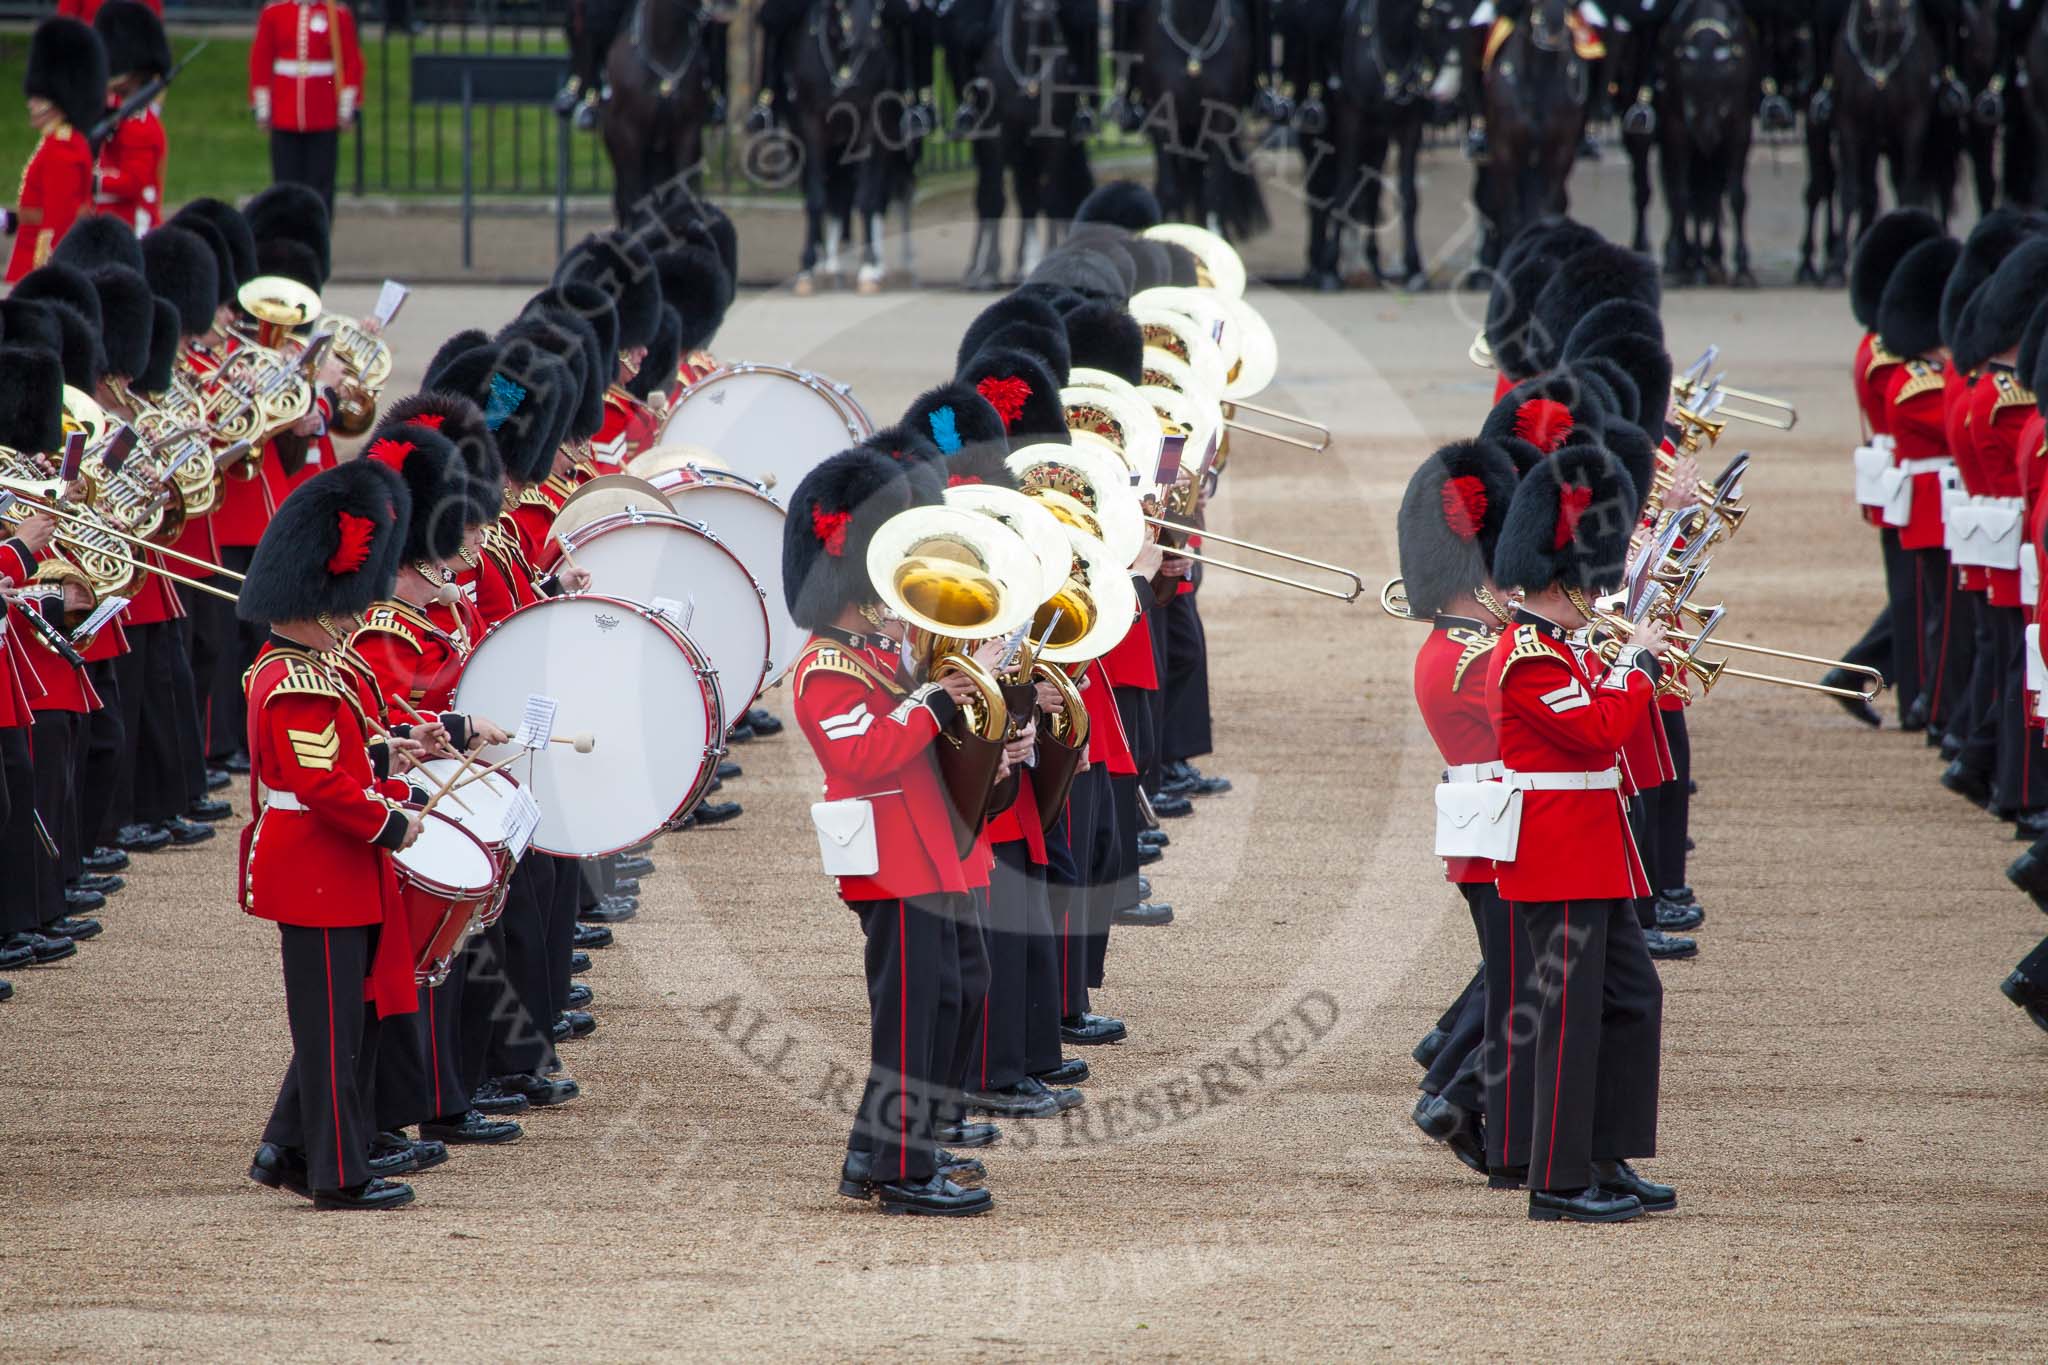 Trooping the Colour 2012: The Massed bands during the March Past..
Horse Guards Parade, Westminster,
London SW1,

United Kingdom,
on 16 June 2012 at 11:32, image #380